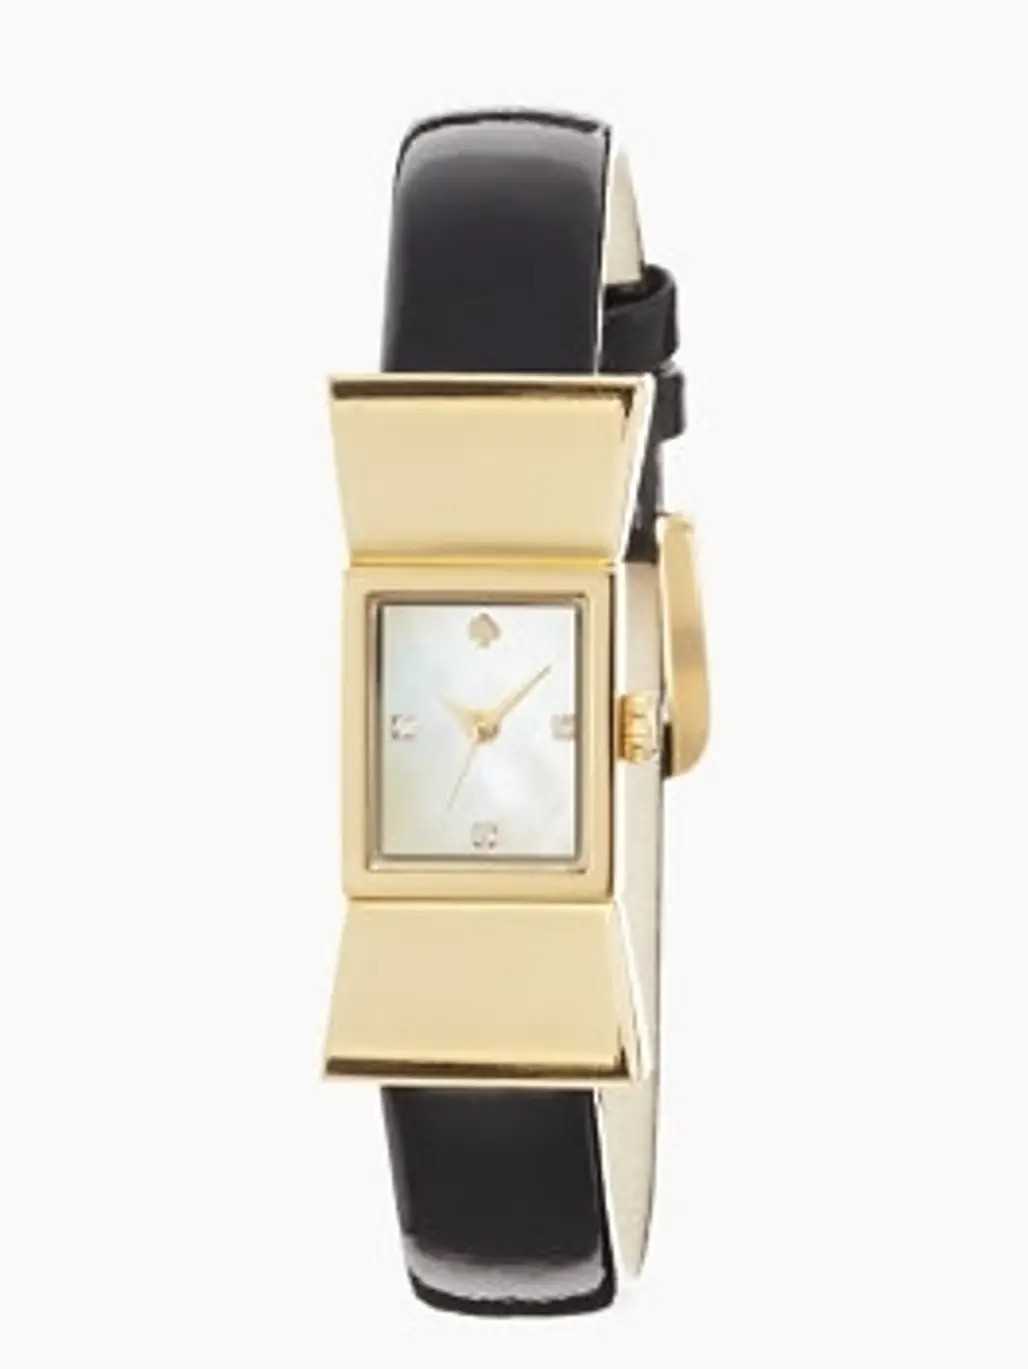 Kate Spade "Carlyle Strap Watch" in Black and Gold